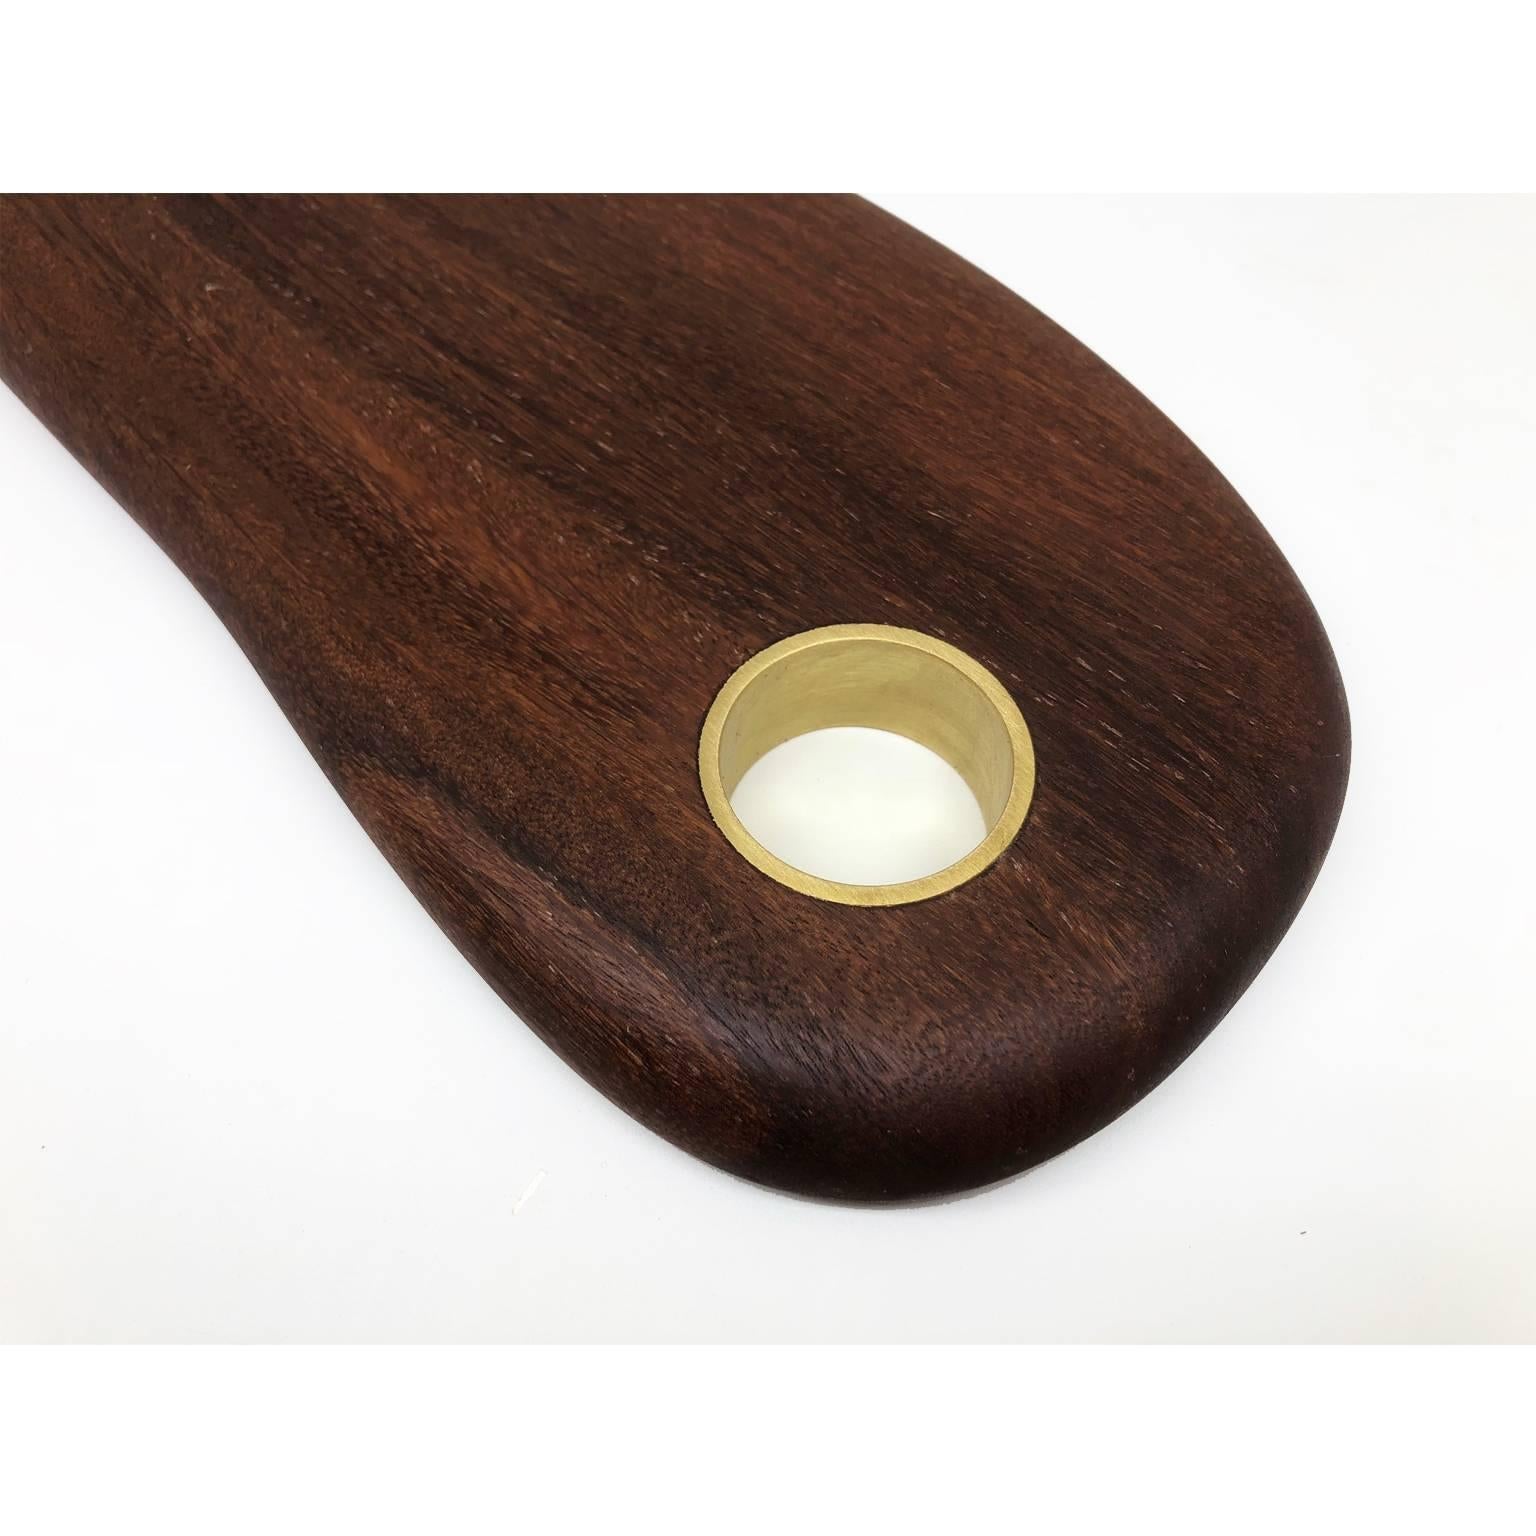 Hand-Crafted Cutting Gourmet Board Made of Tropical Hardwood in Brazilian Contemporary Design